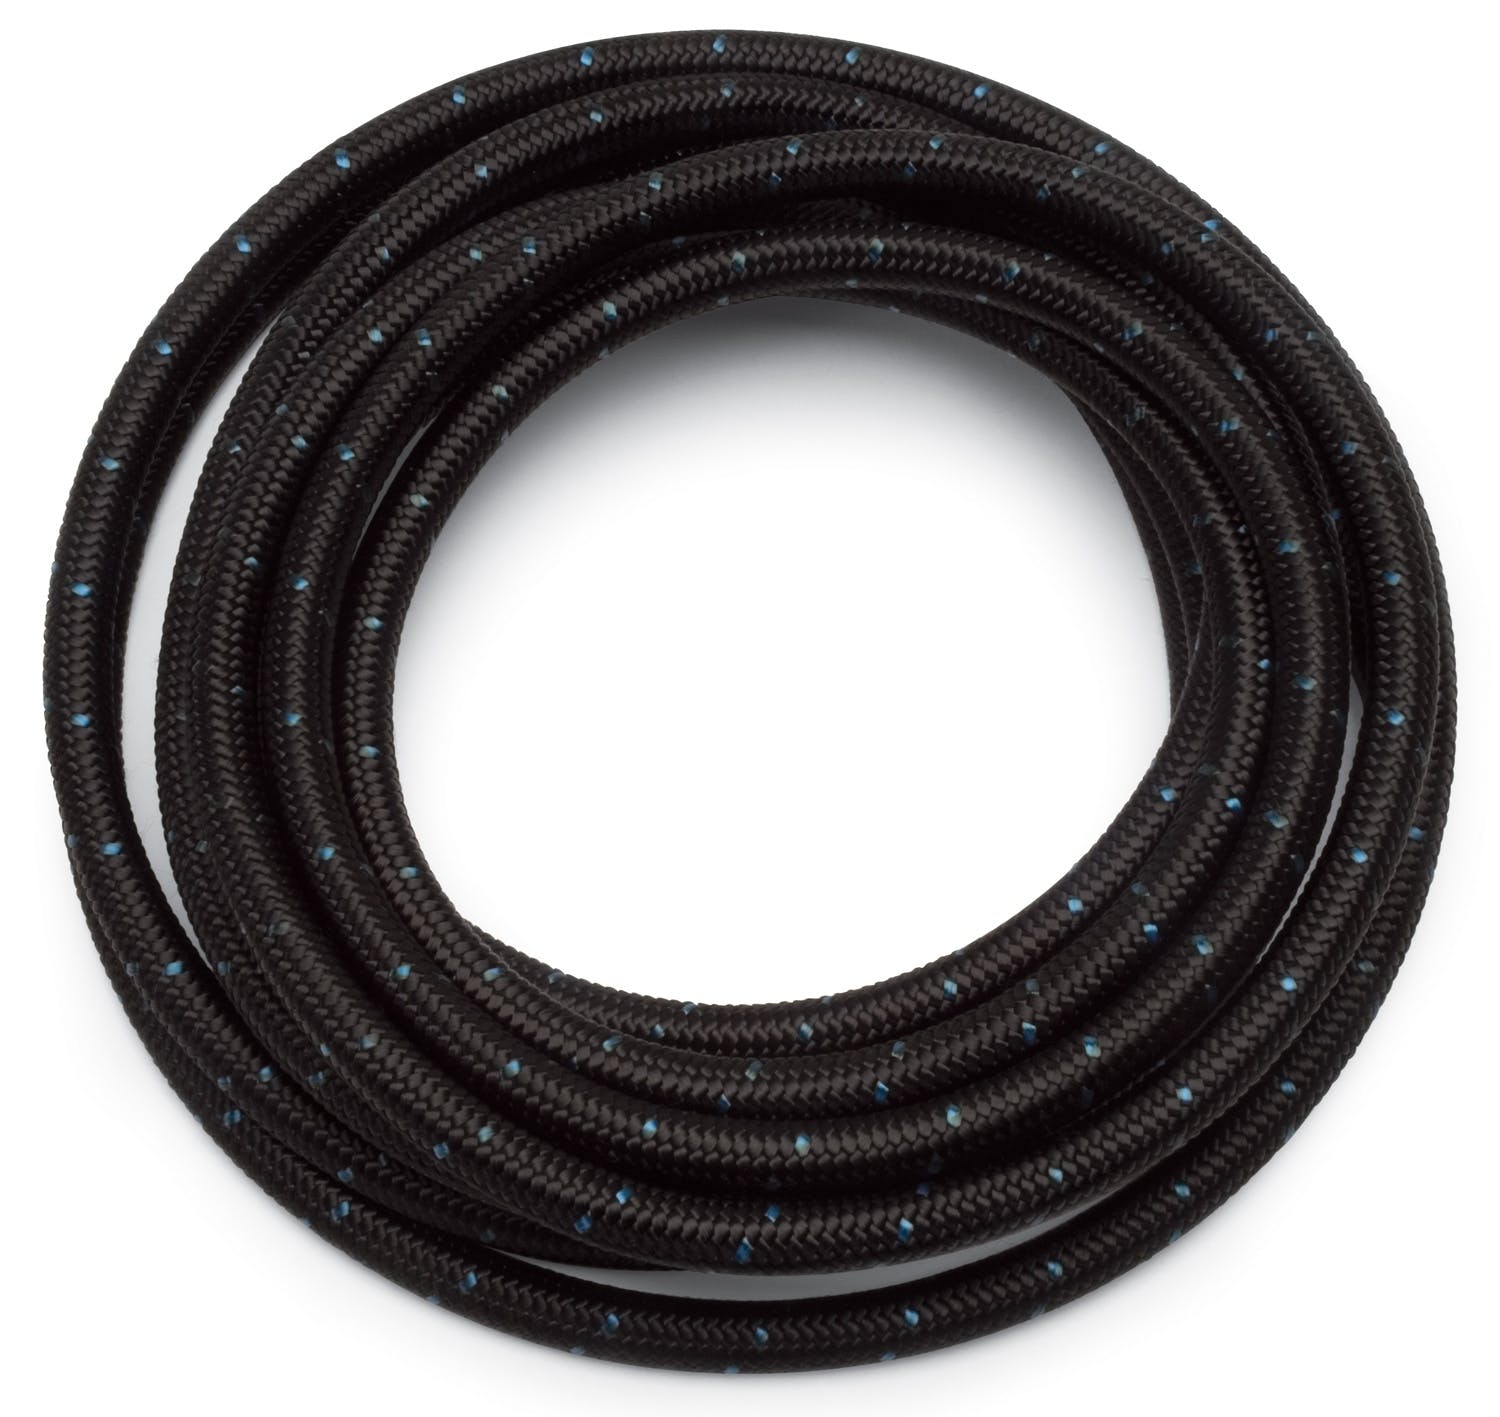 Russell 630383 Hose -6 ProClassic 500 FT